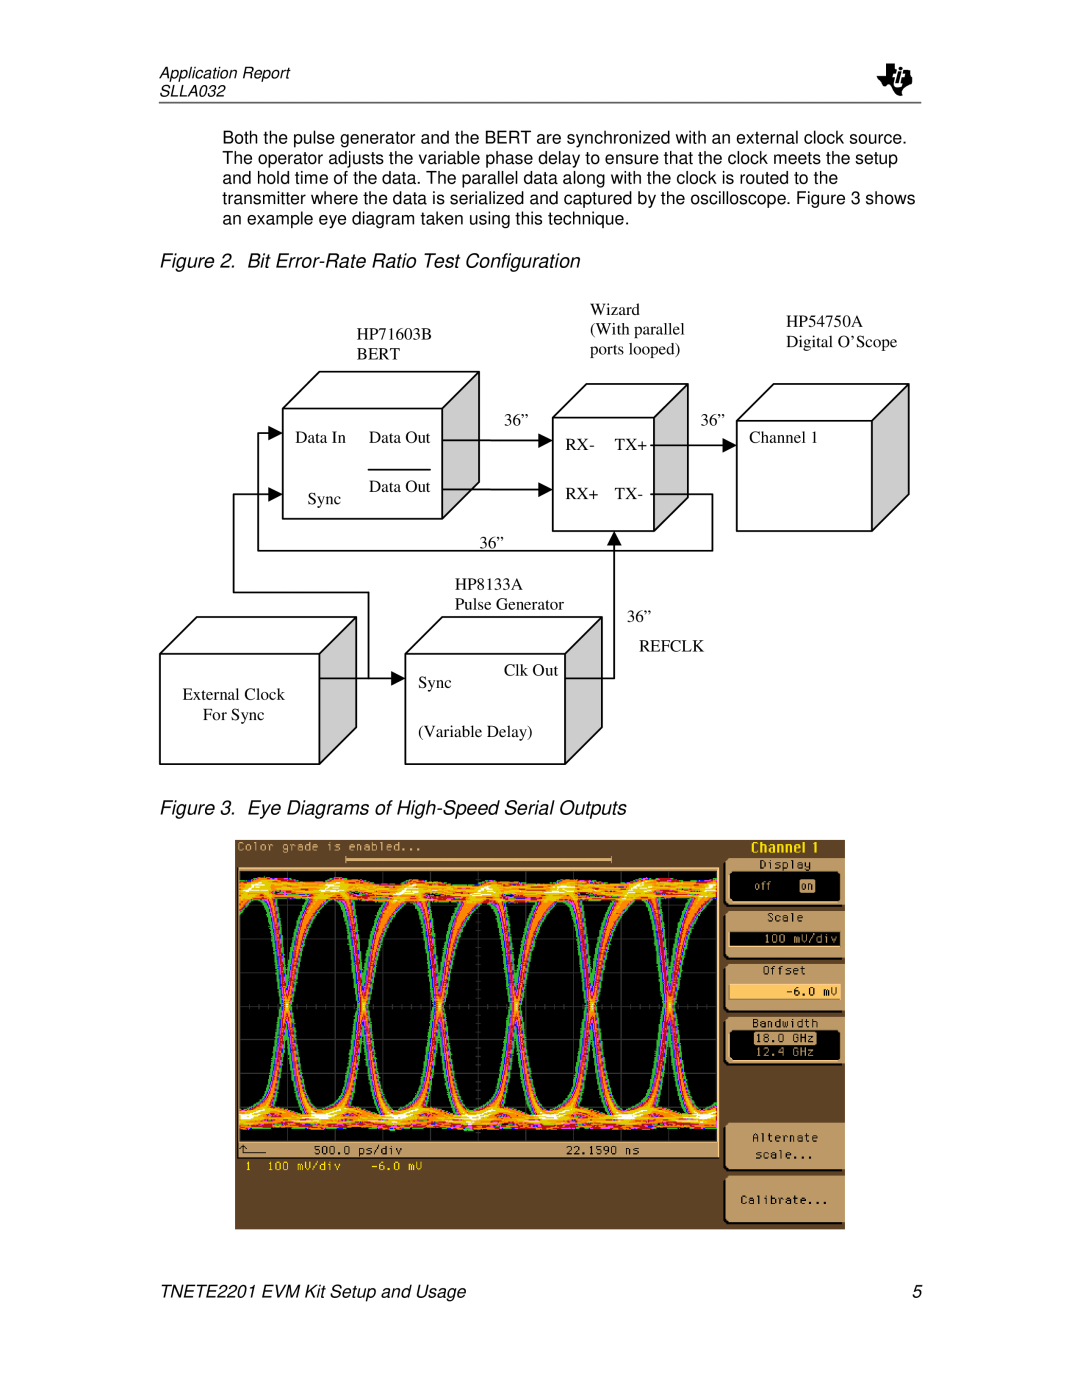 Texas Instruments TNETE2201 manual Bit Error-Rate Ratio Test Configuration, Eye Diagrams of High-Speed Serial Outputs 